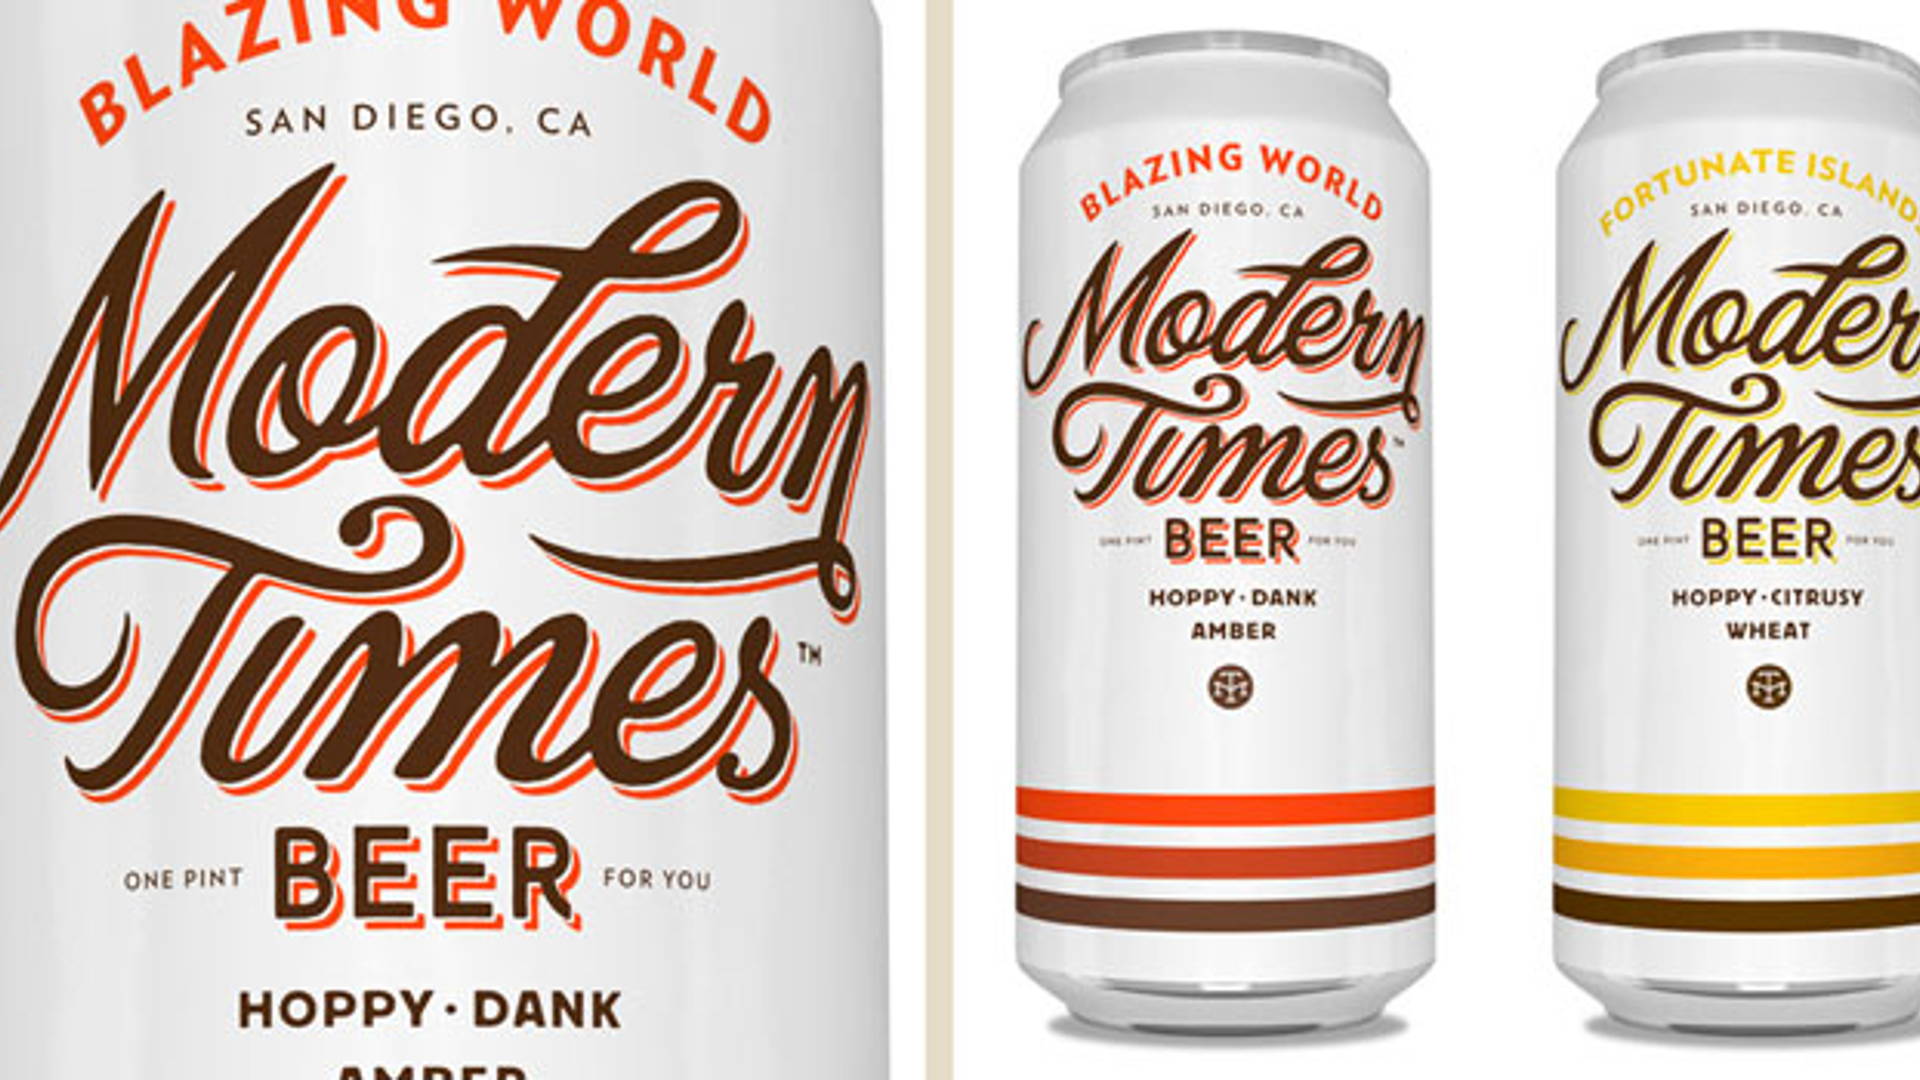 Featured image for Modern Times Beer 